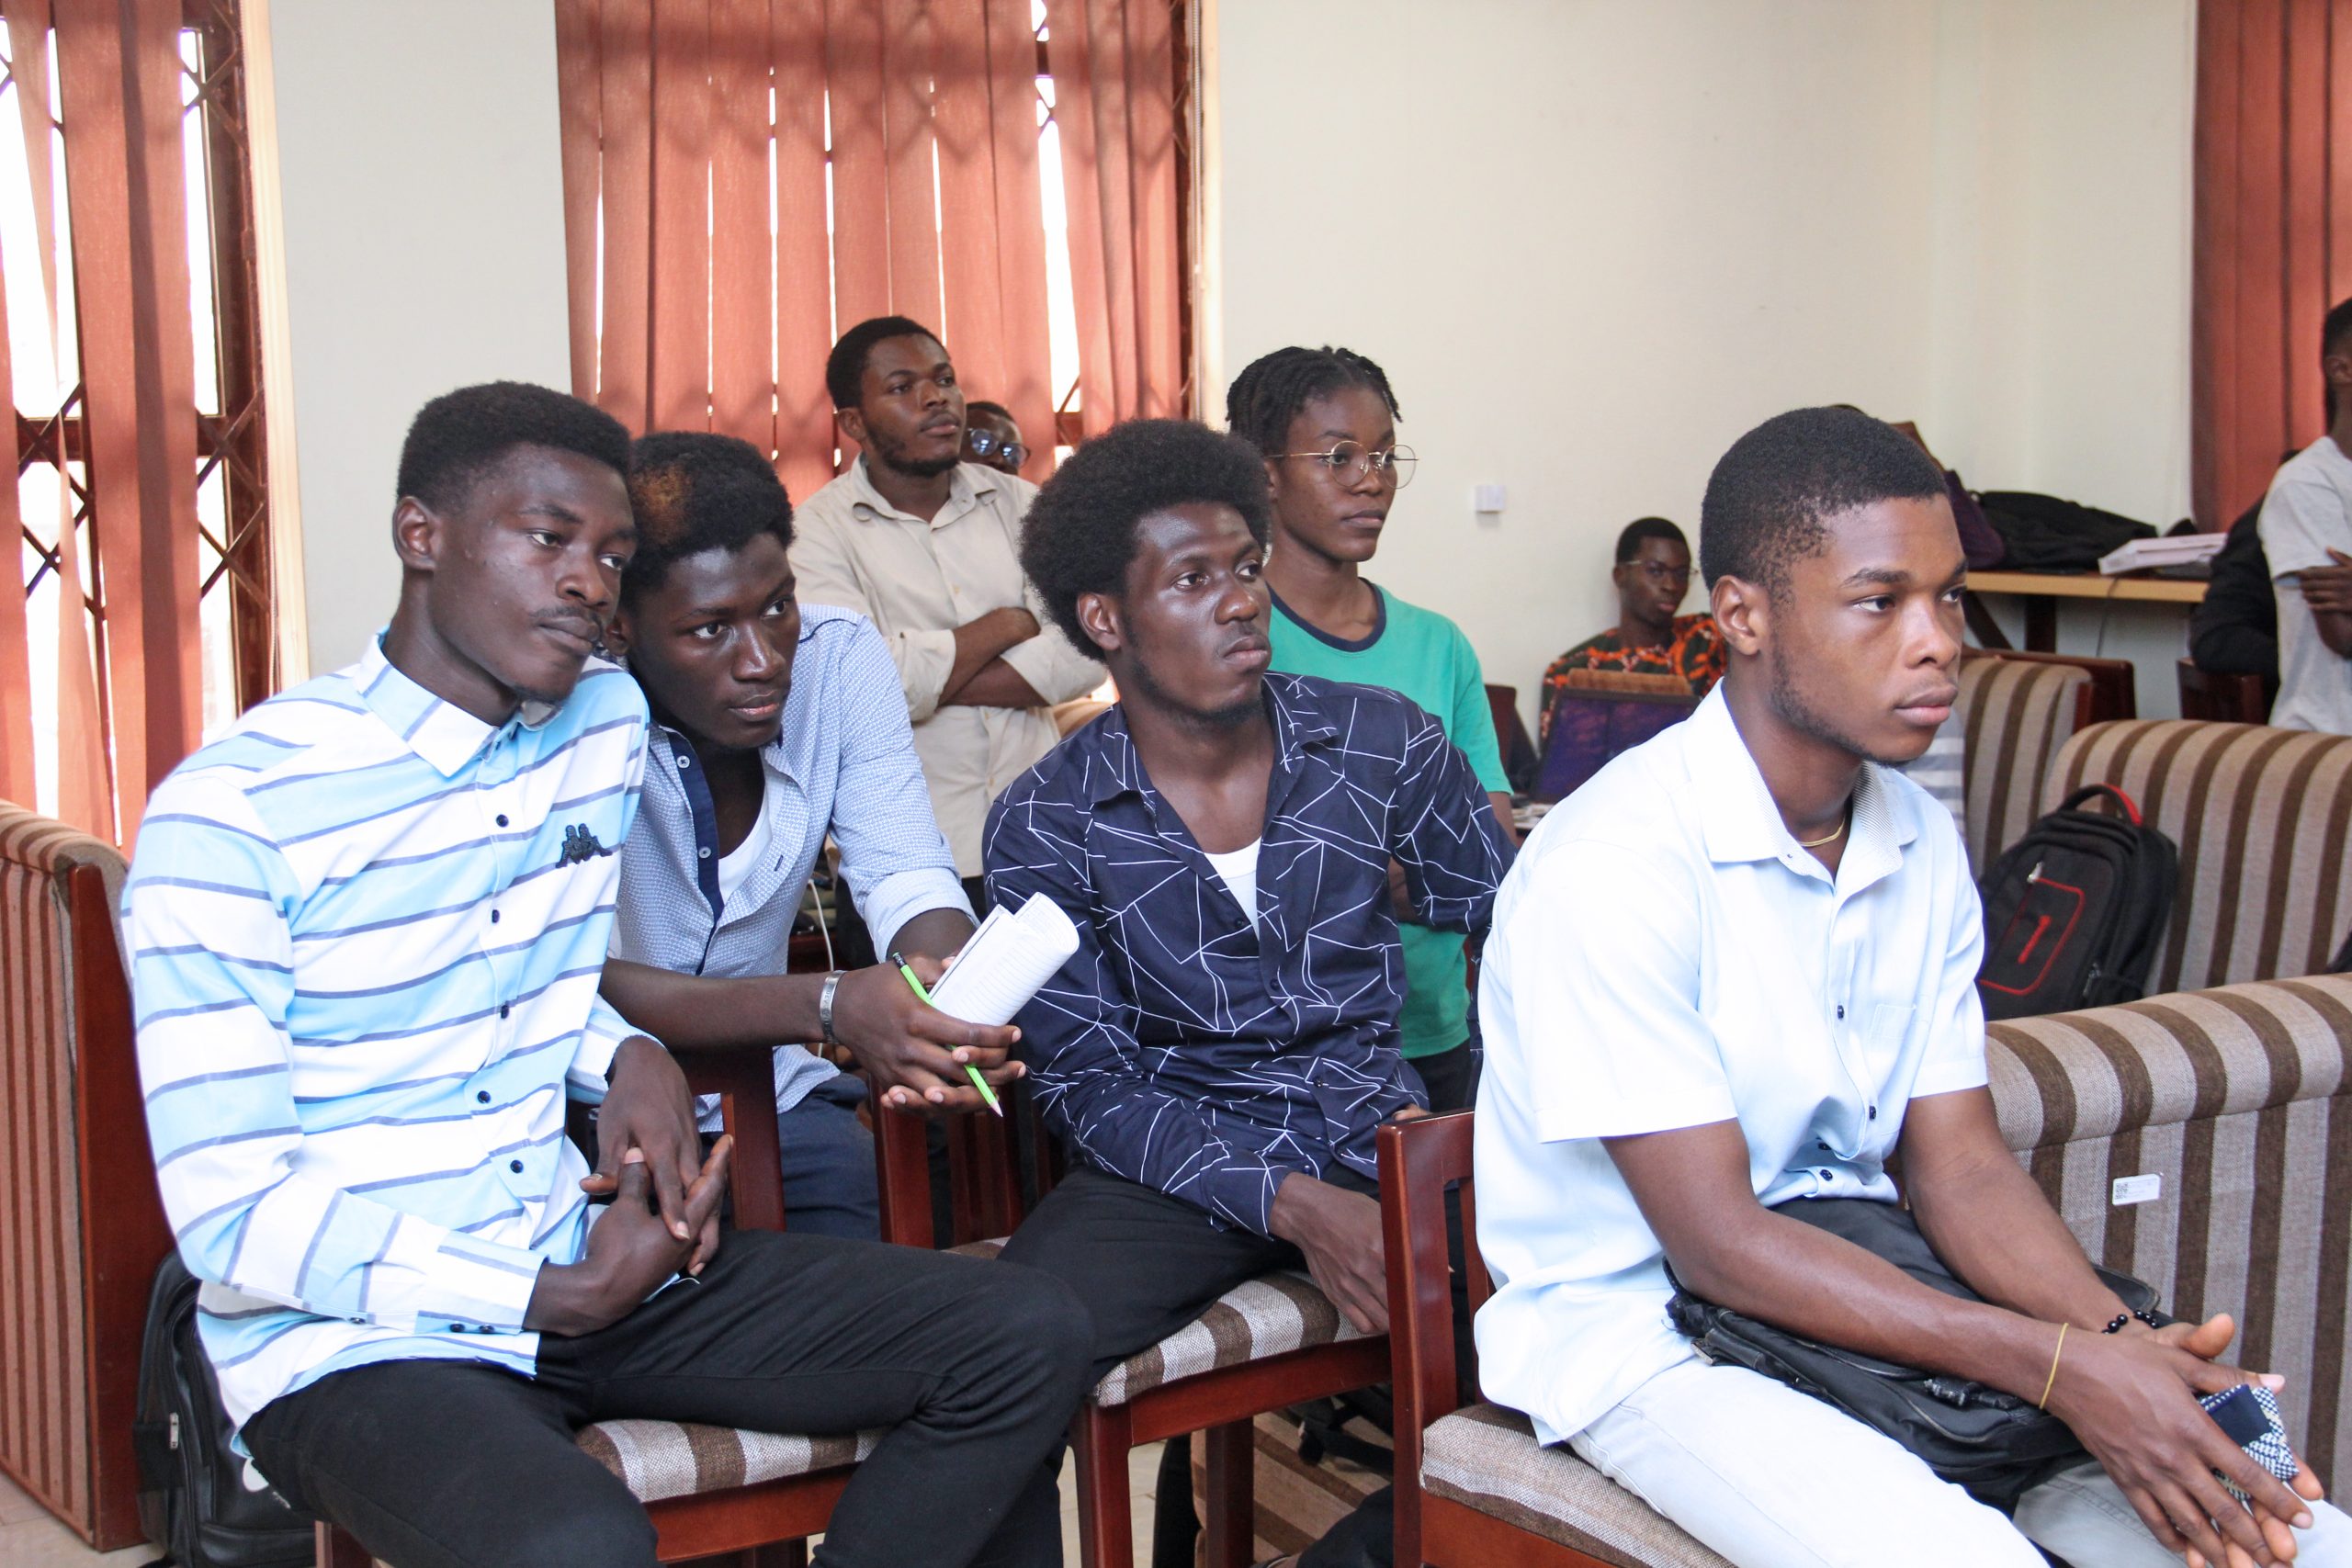 Young people watching a presentation